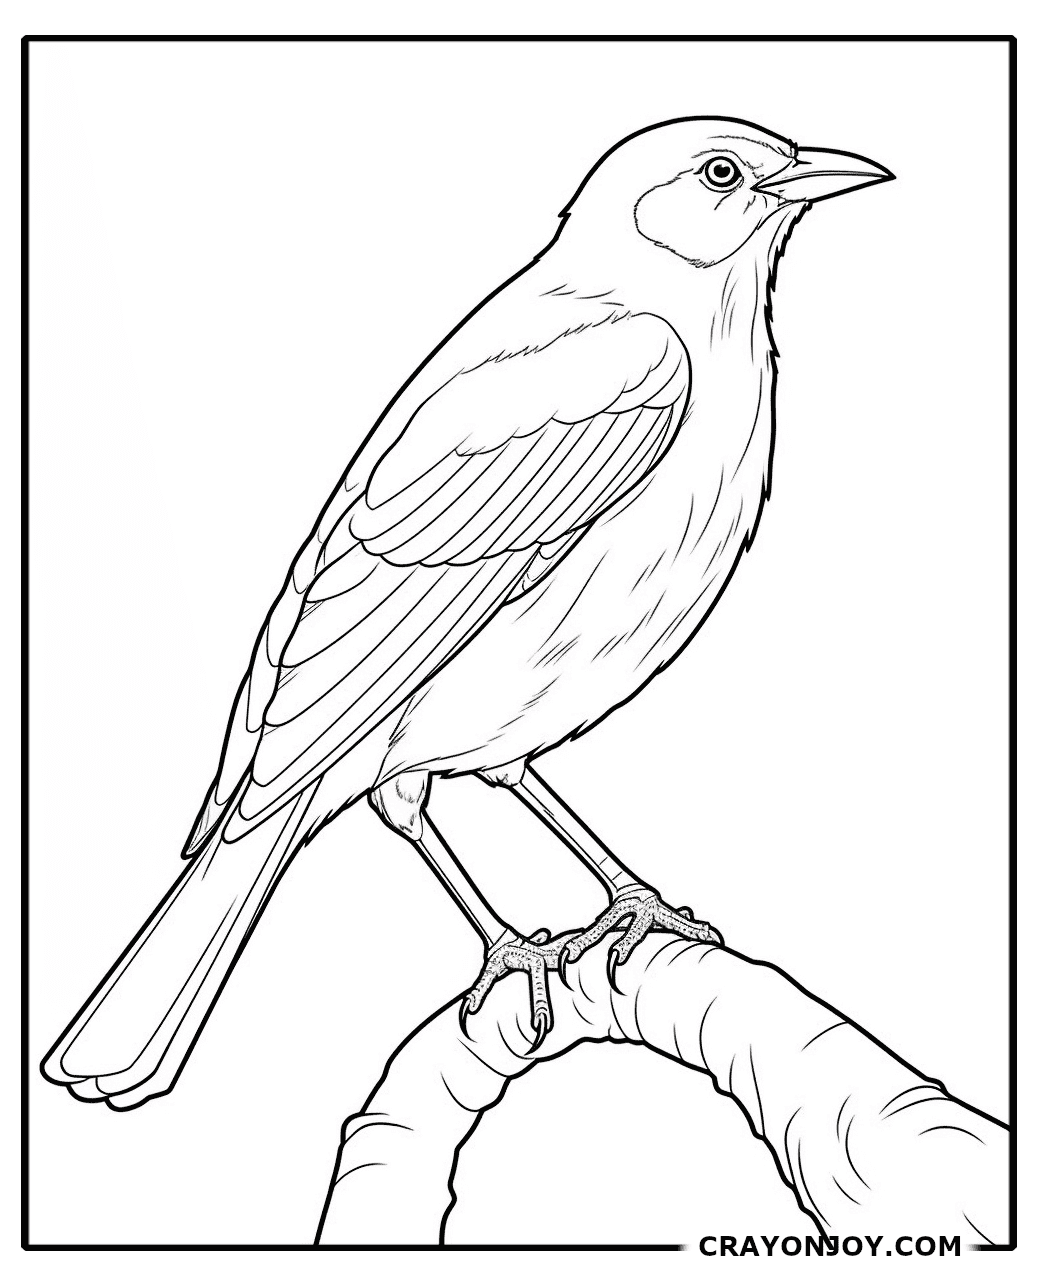 Free Printable Blackbird Coloring Pages for Kids & Adults